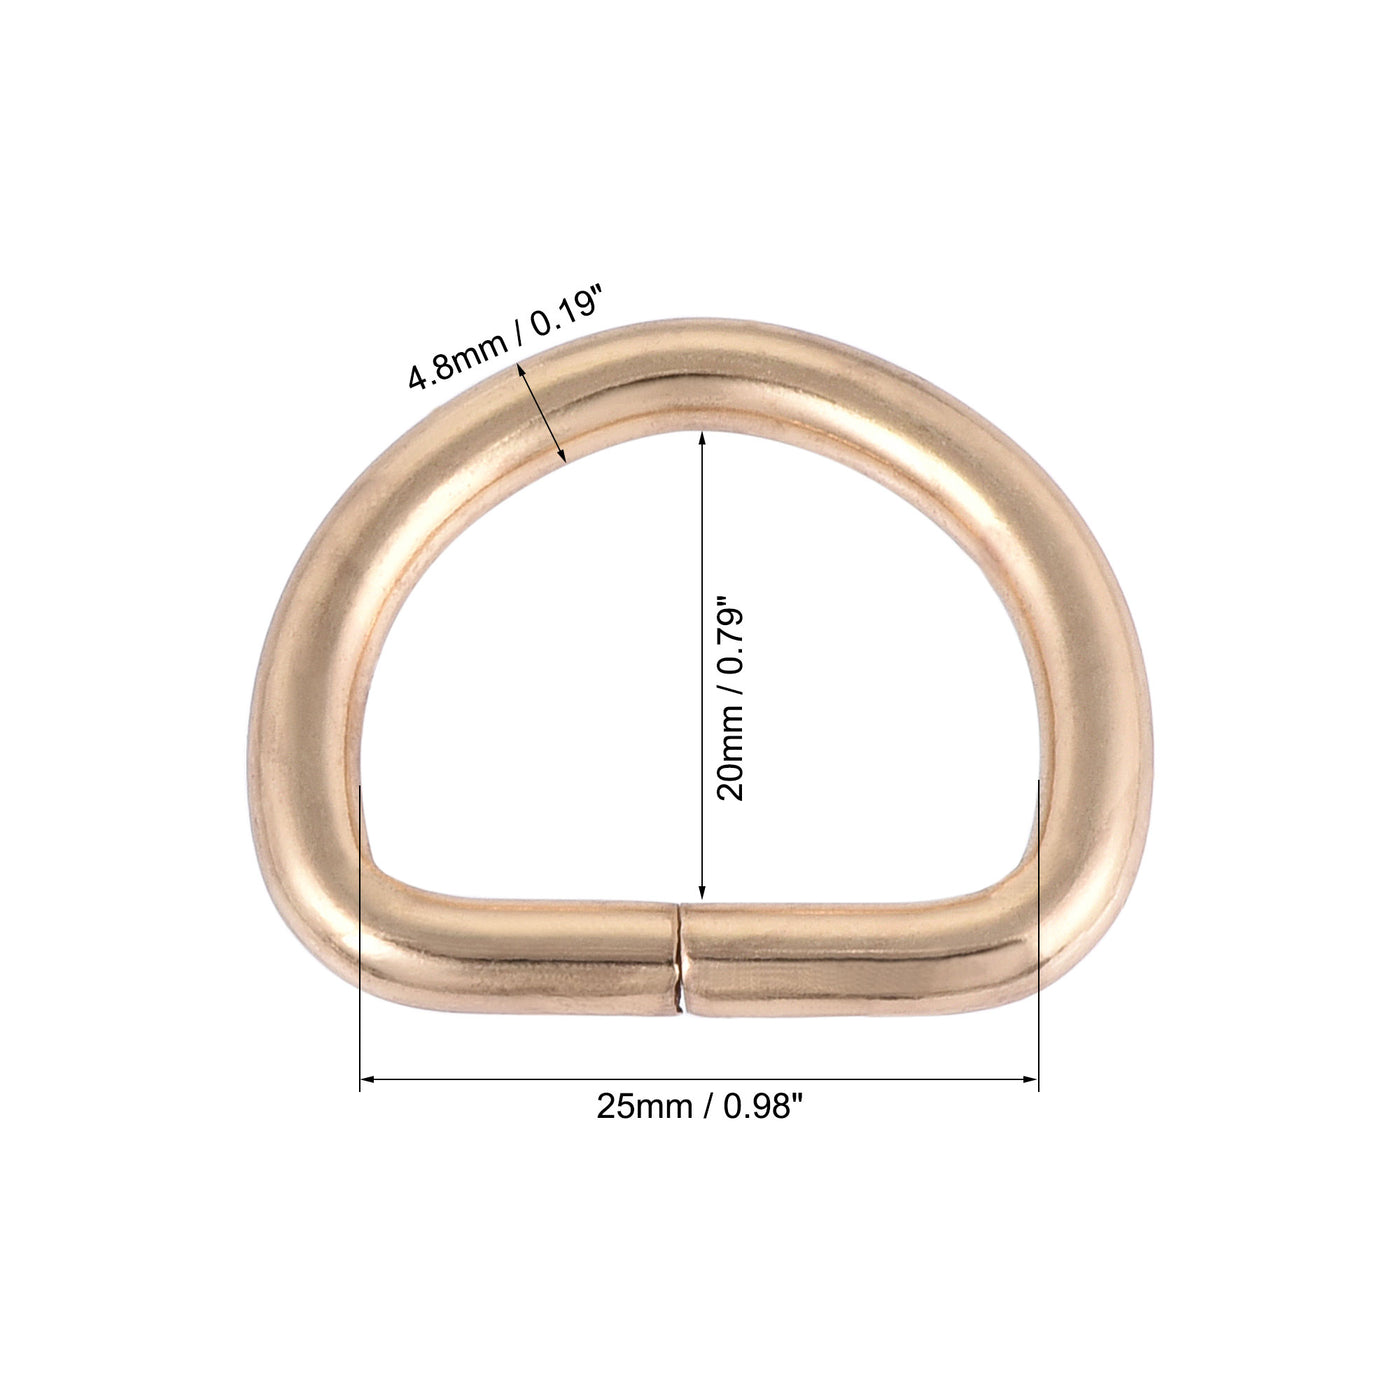 uxcell Uxcell Metal D Ring 0.98"(25mm) D-Rings Buckle for Hardware Bags Belts Craft DIY Accessories Gold Tone 50pcs